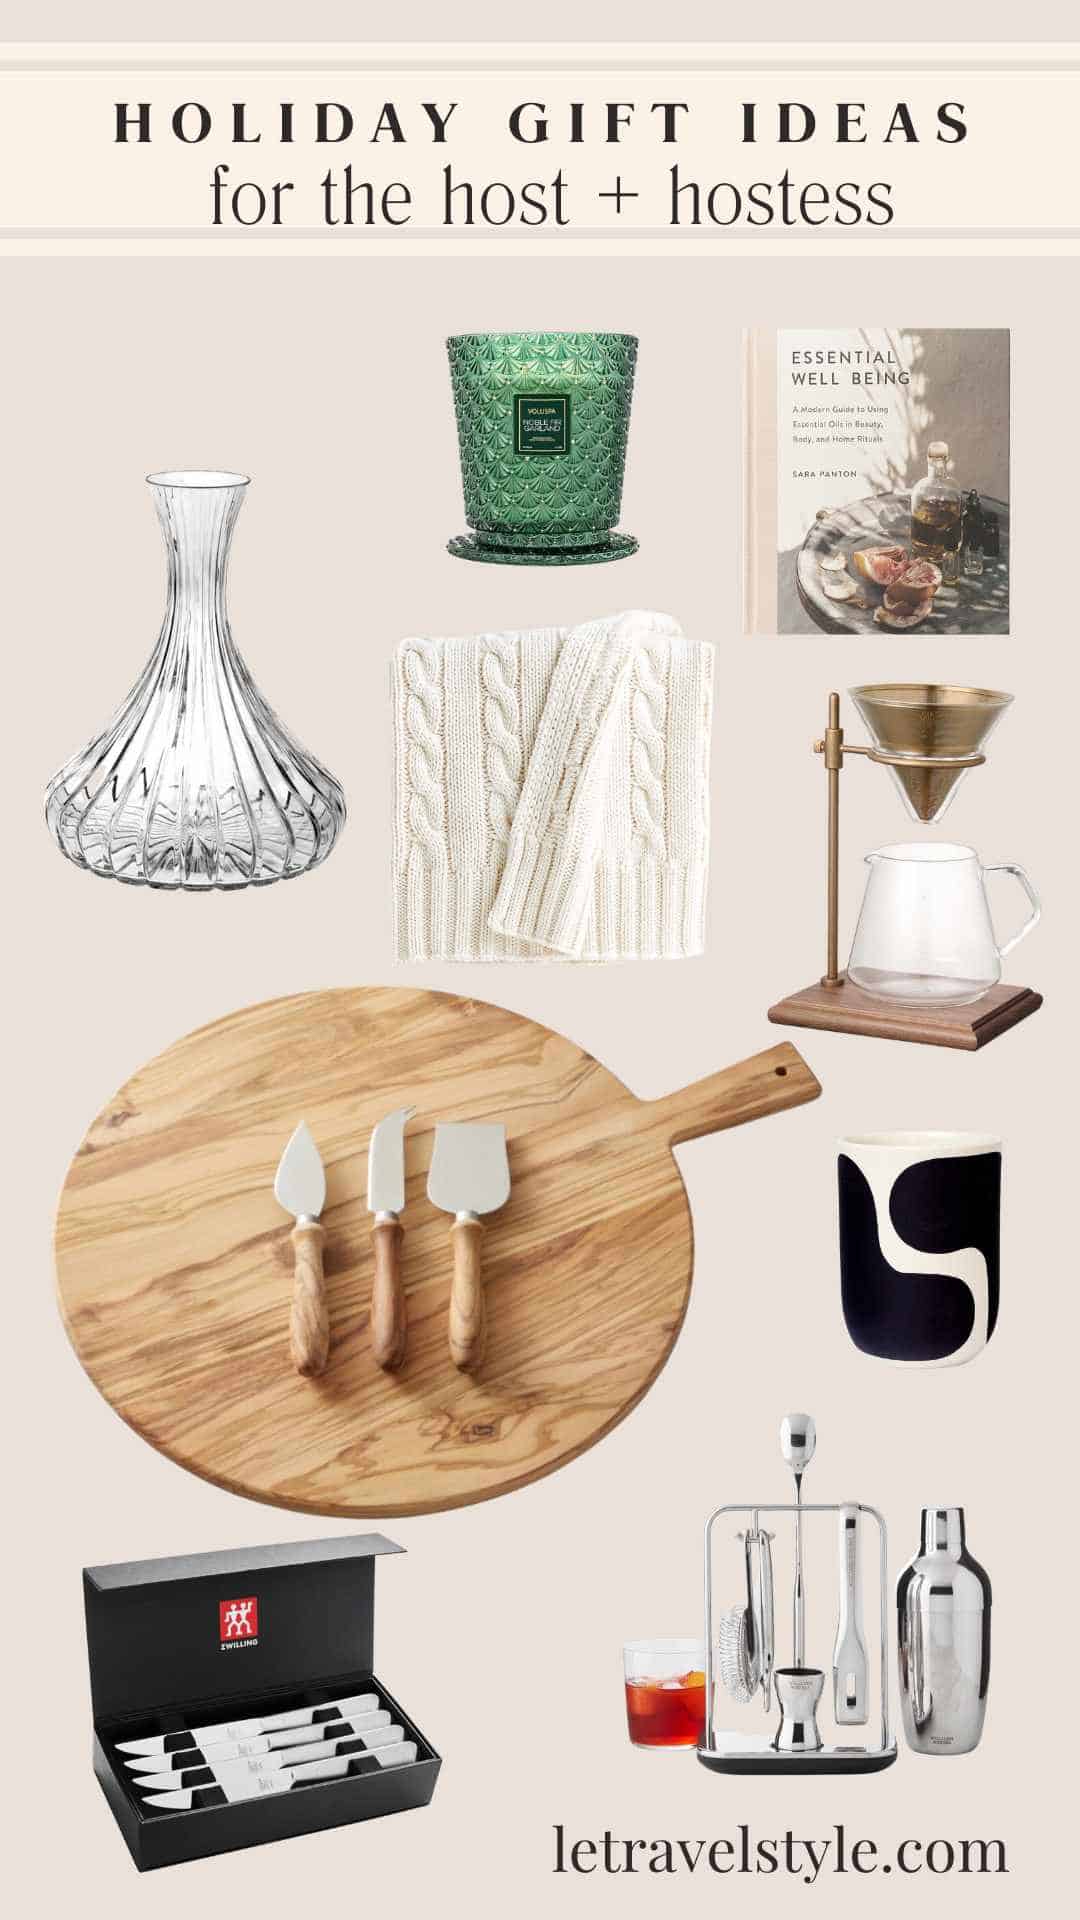 Gift ideas for the host and hostess